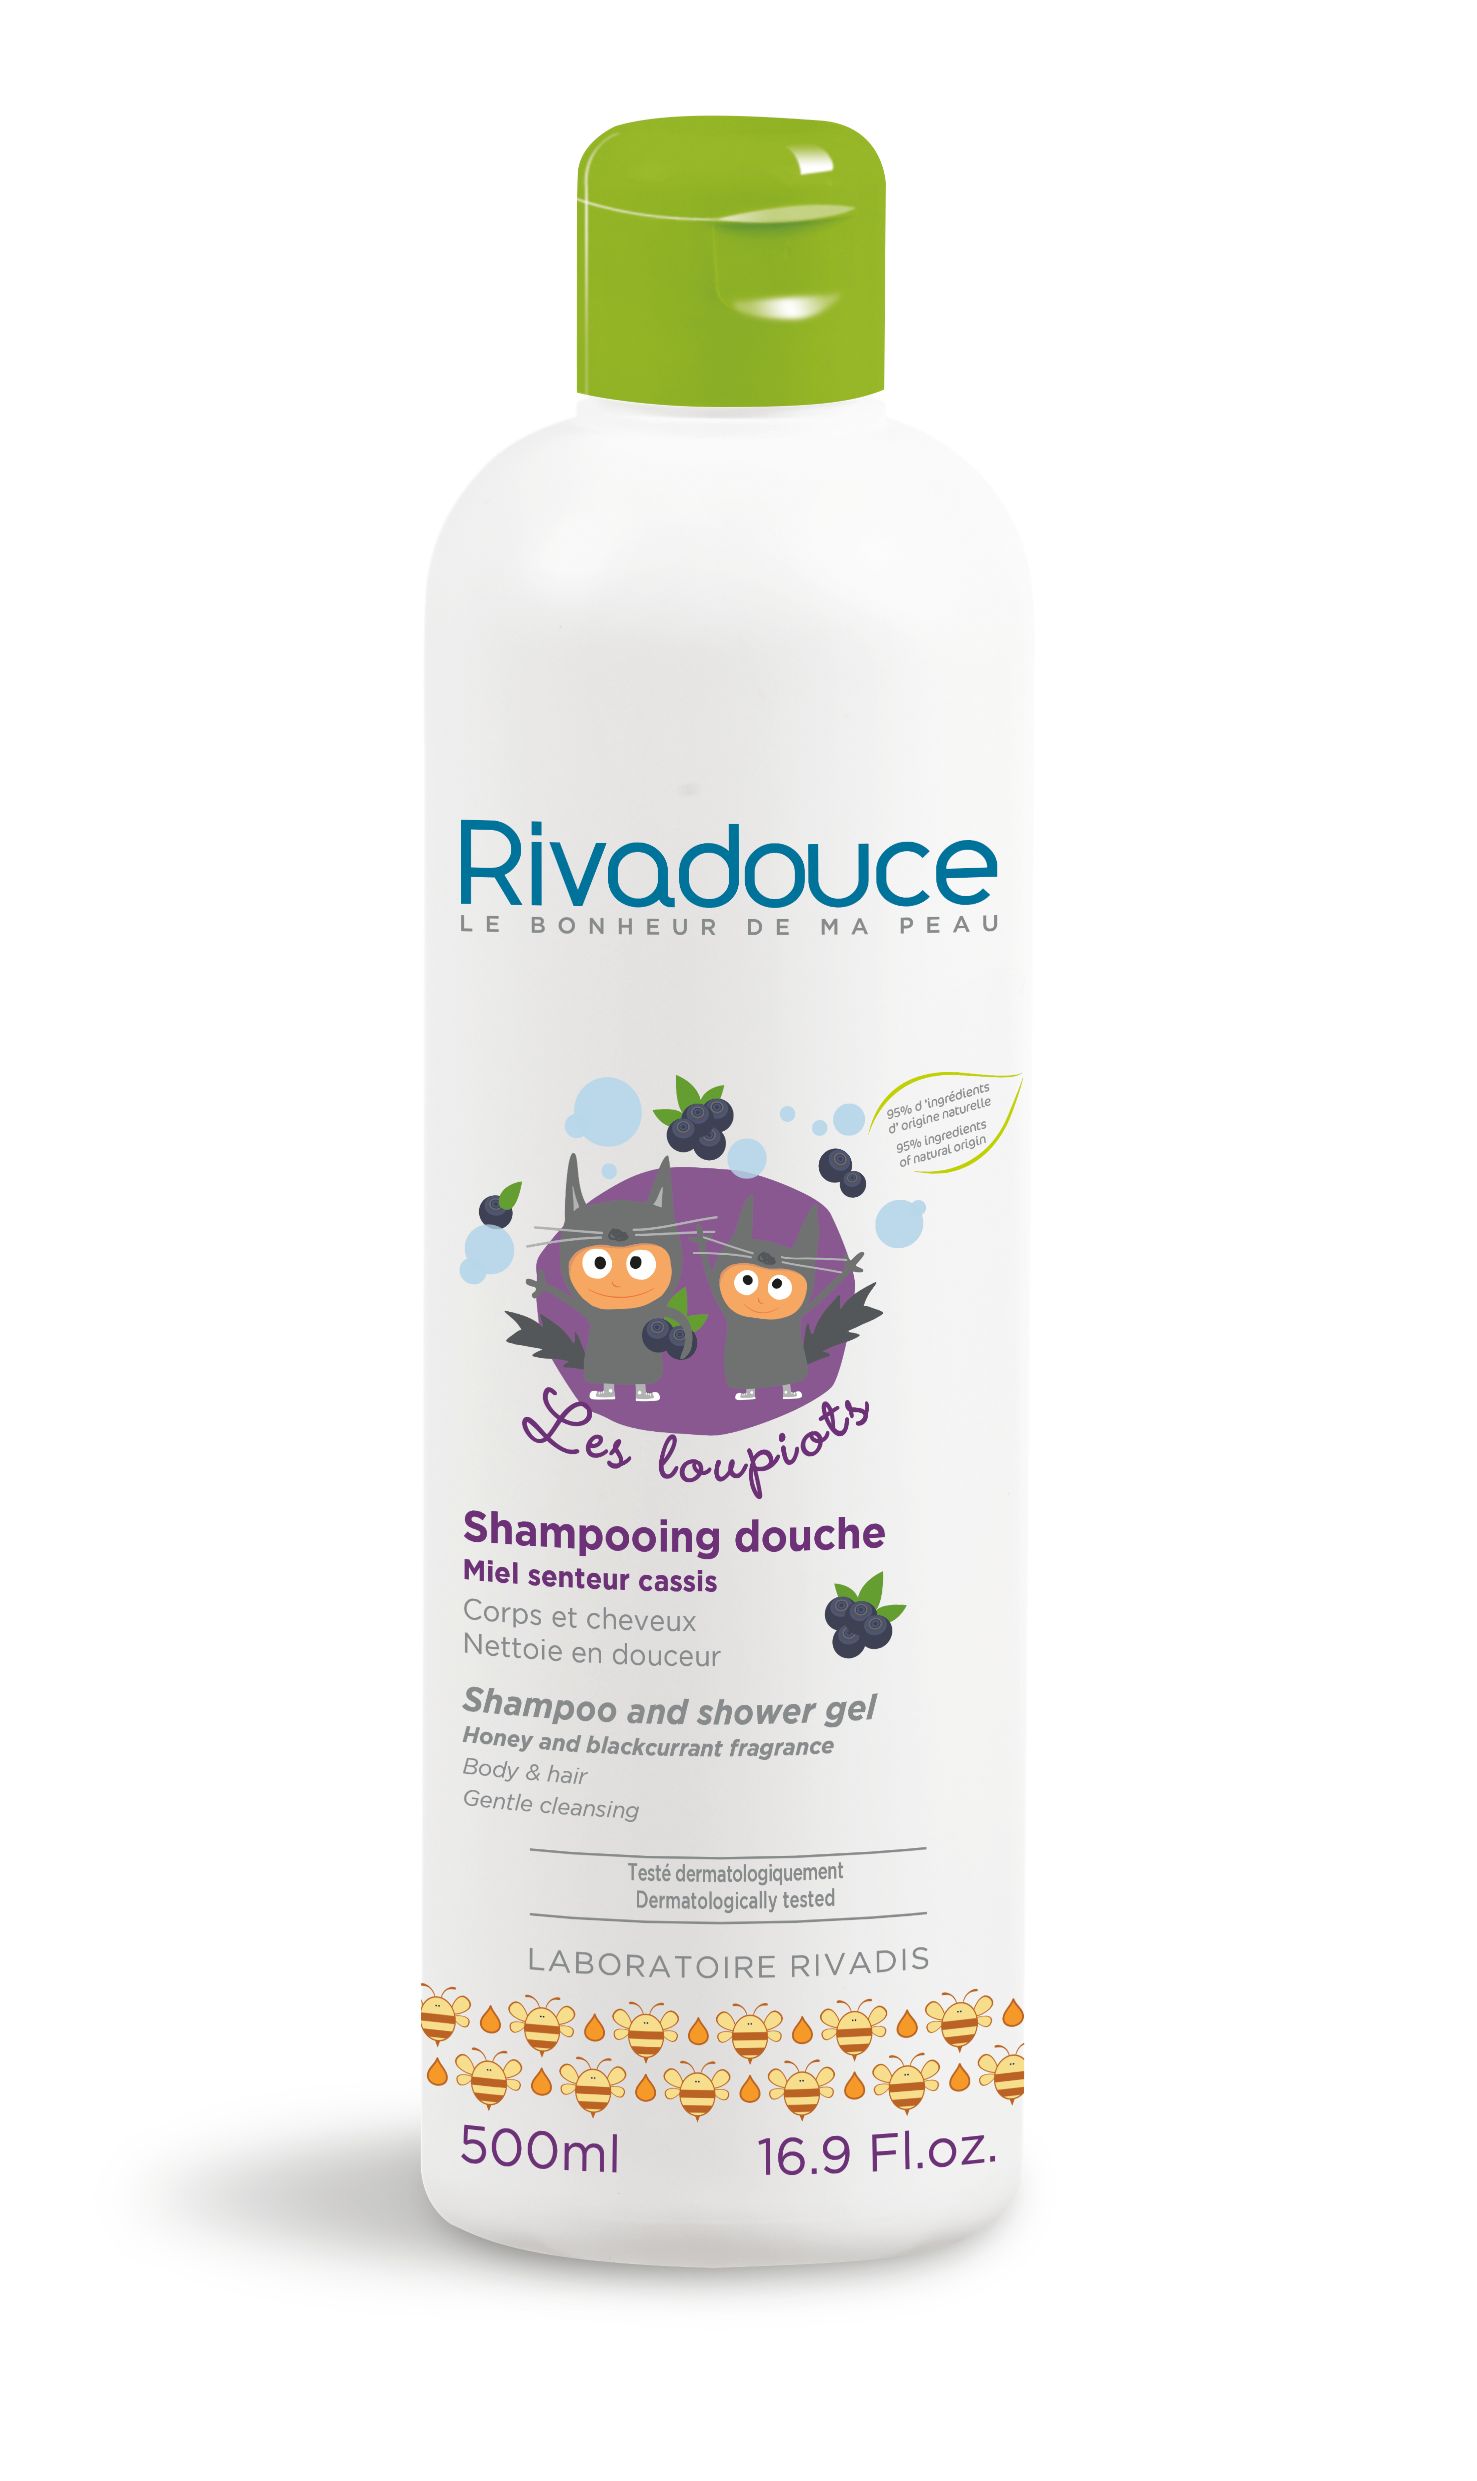 Rivadouce Loupiots Shampooing Douche Miel et Cassis (Honey and Blackcurrant Shampoo and Body Wash) 500ml